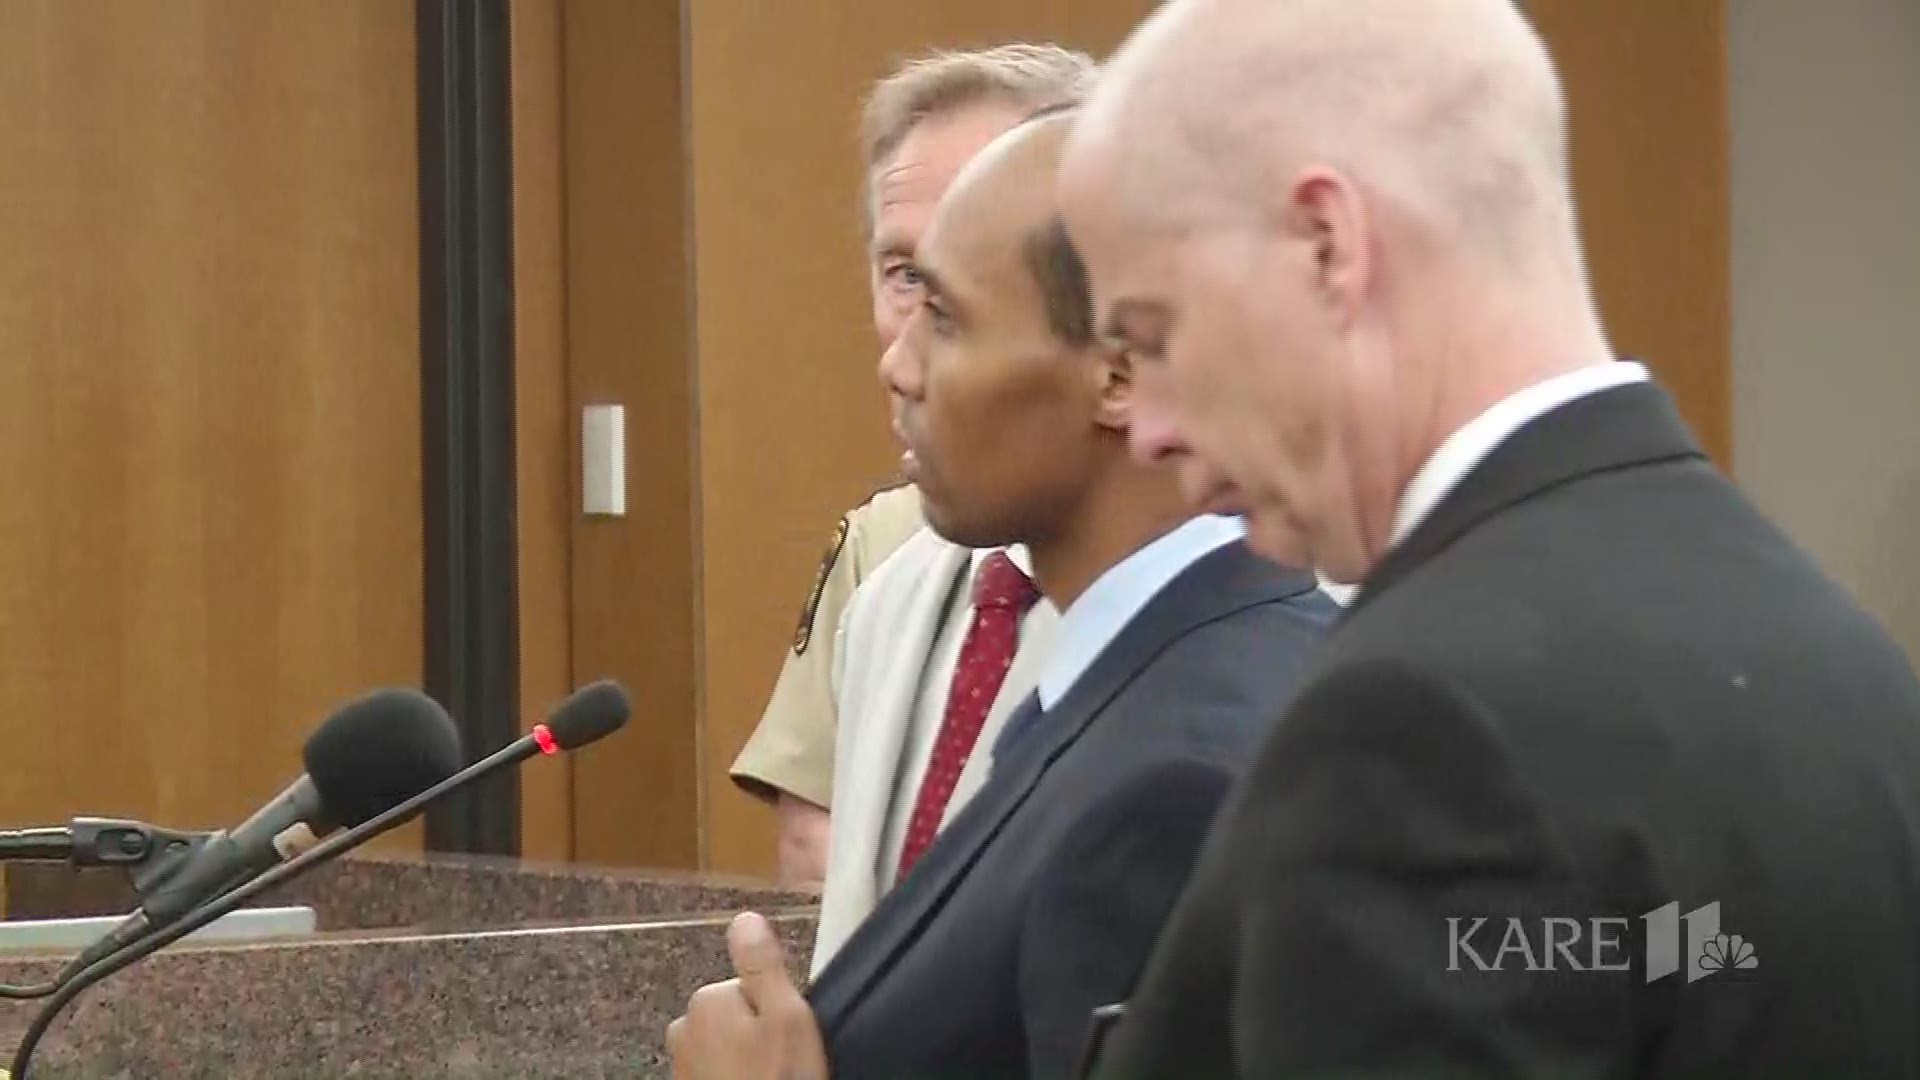 Mohamed Noor speaks to Justine Ruszczyk Damond's family in emotional statement: "I have owed Ms. Ruszczyk's family an apology for a long time... I have lived with this, and will continue to live with this." https://kare11.tv/2Zg6m1s